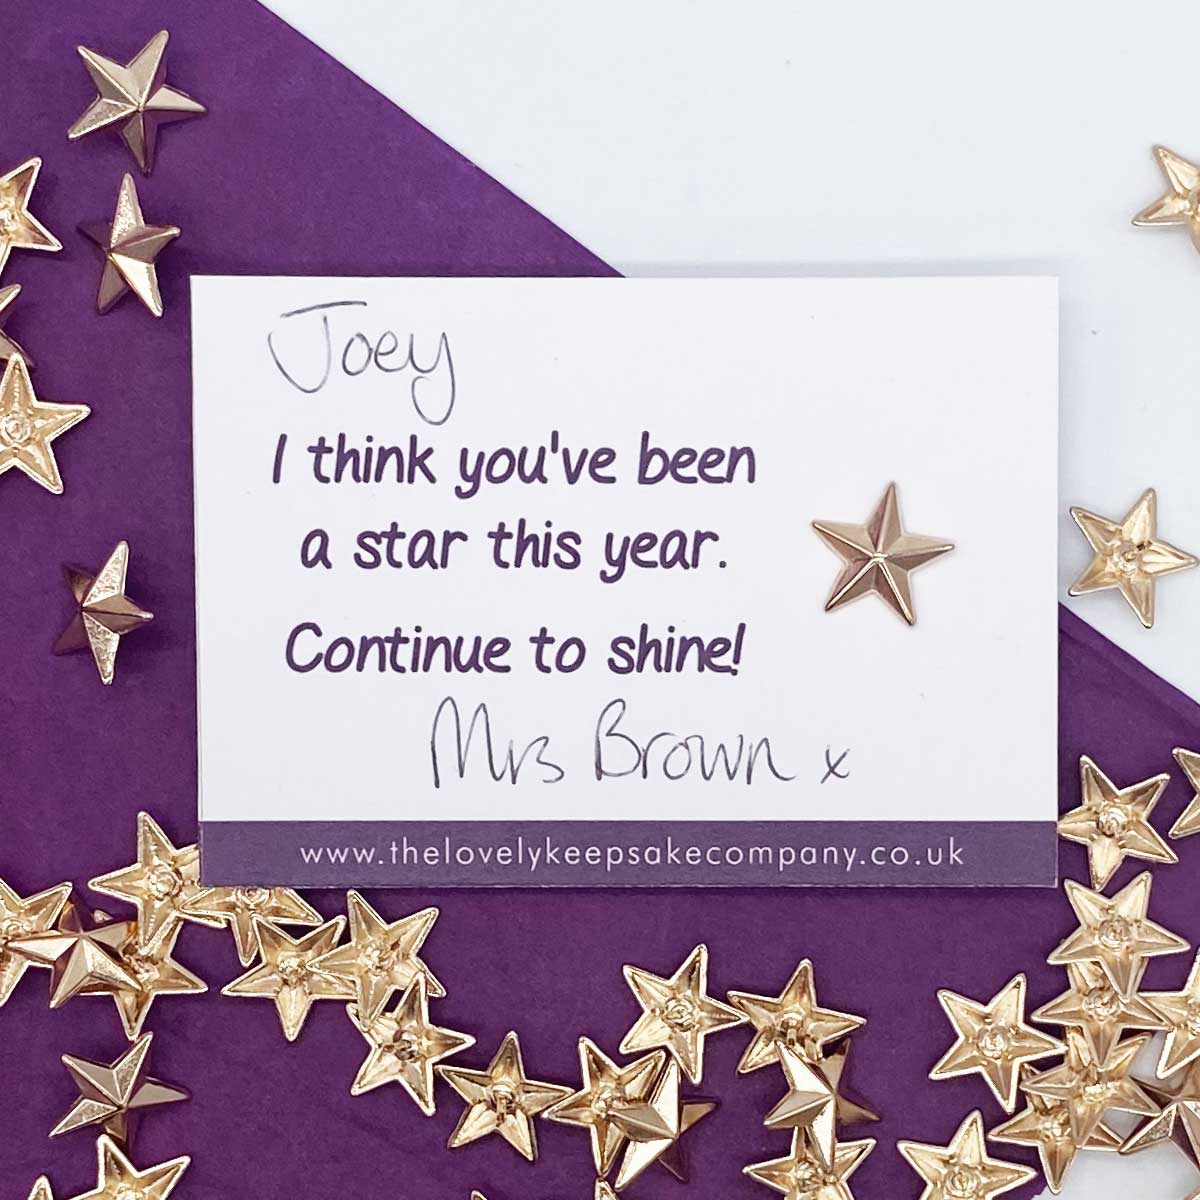 Pack of 10 Gold Star Pins & Message Cards